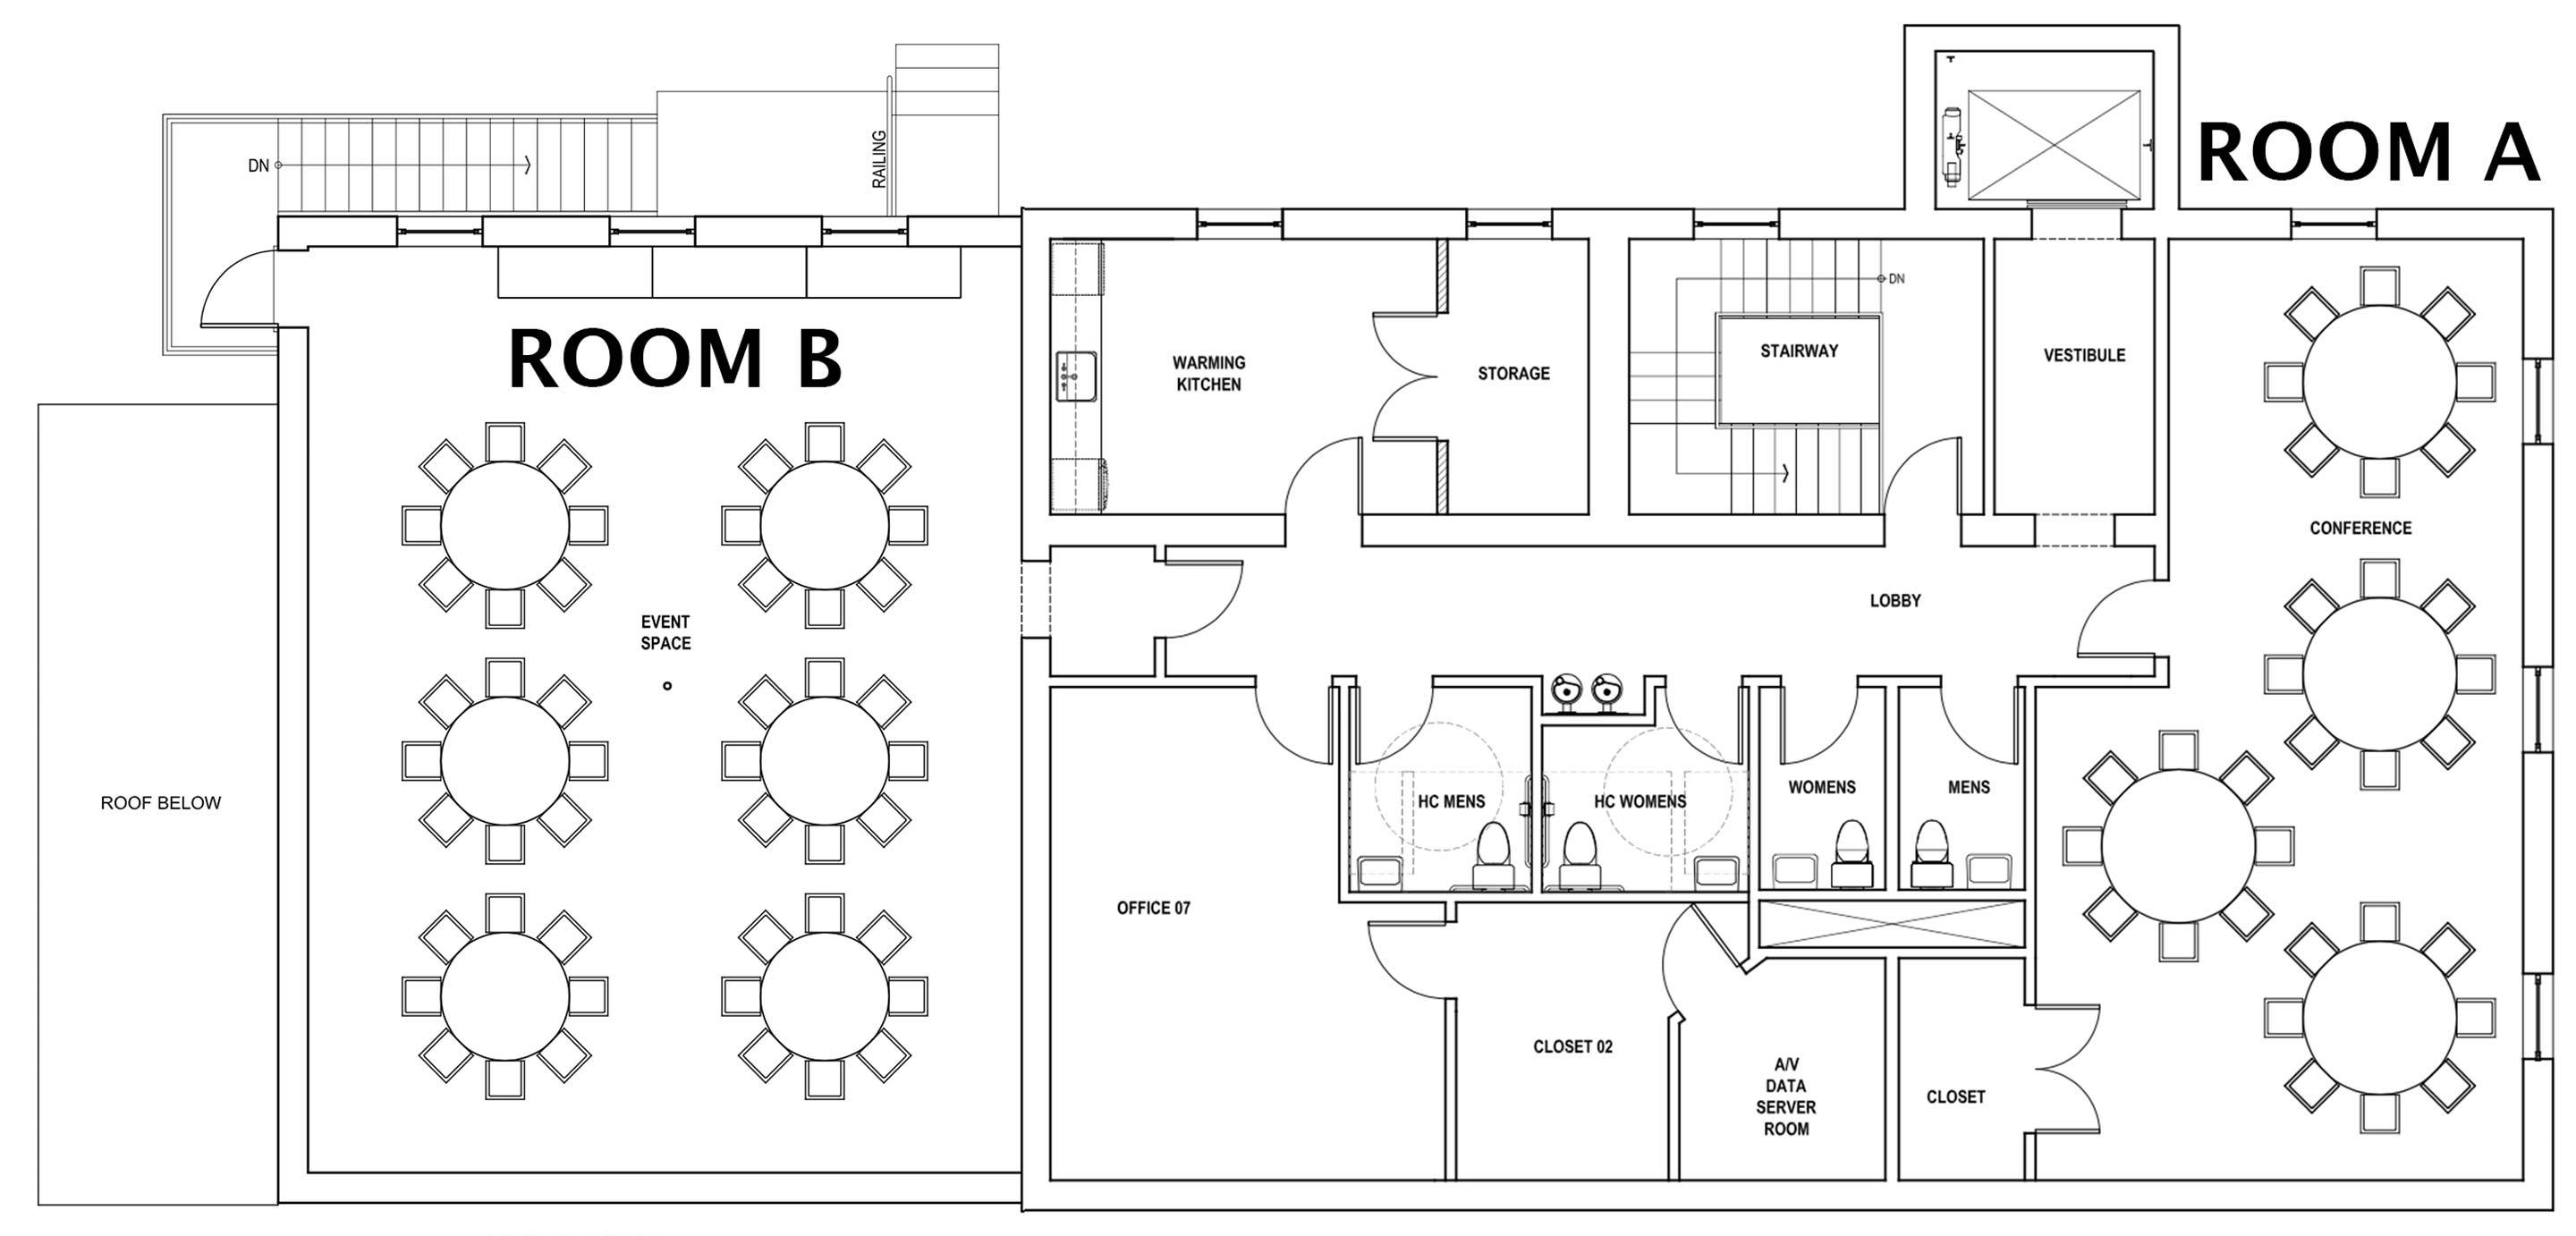 Layout of Rooms A and B